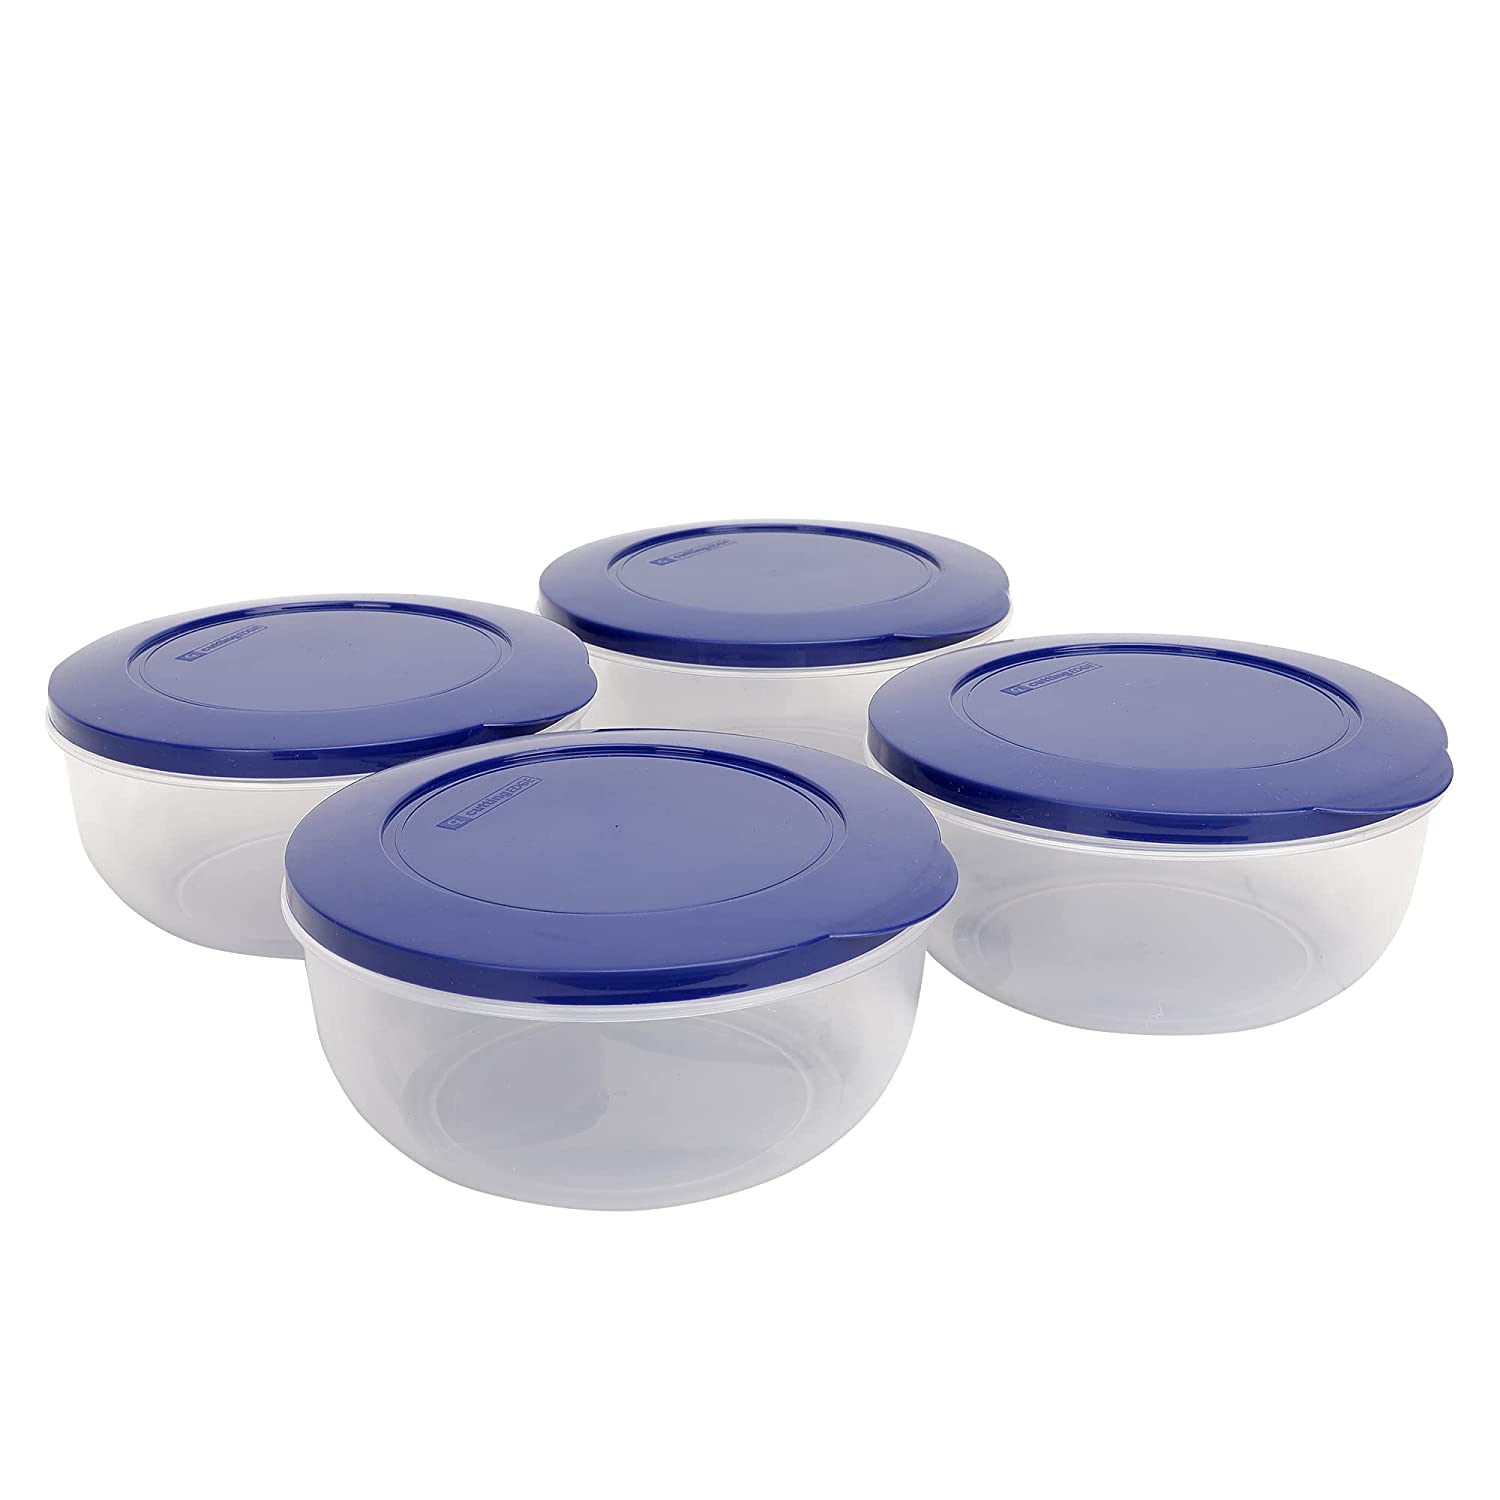 Cutting EDGE Eco-Storage Plastic Container Set for Kitchen & Refrigerator, Set of 4